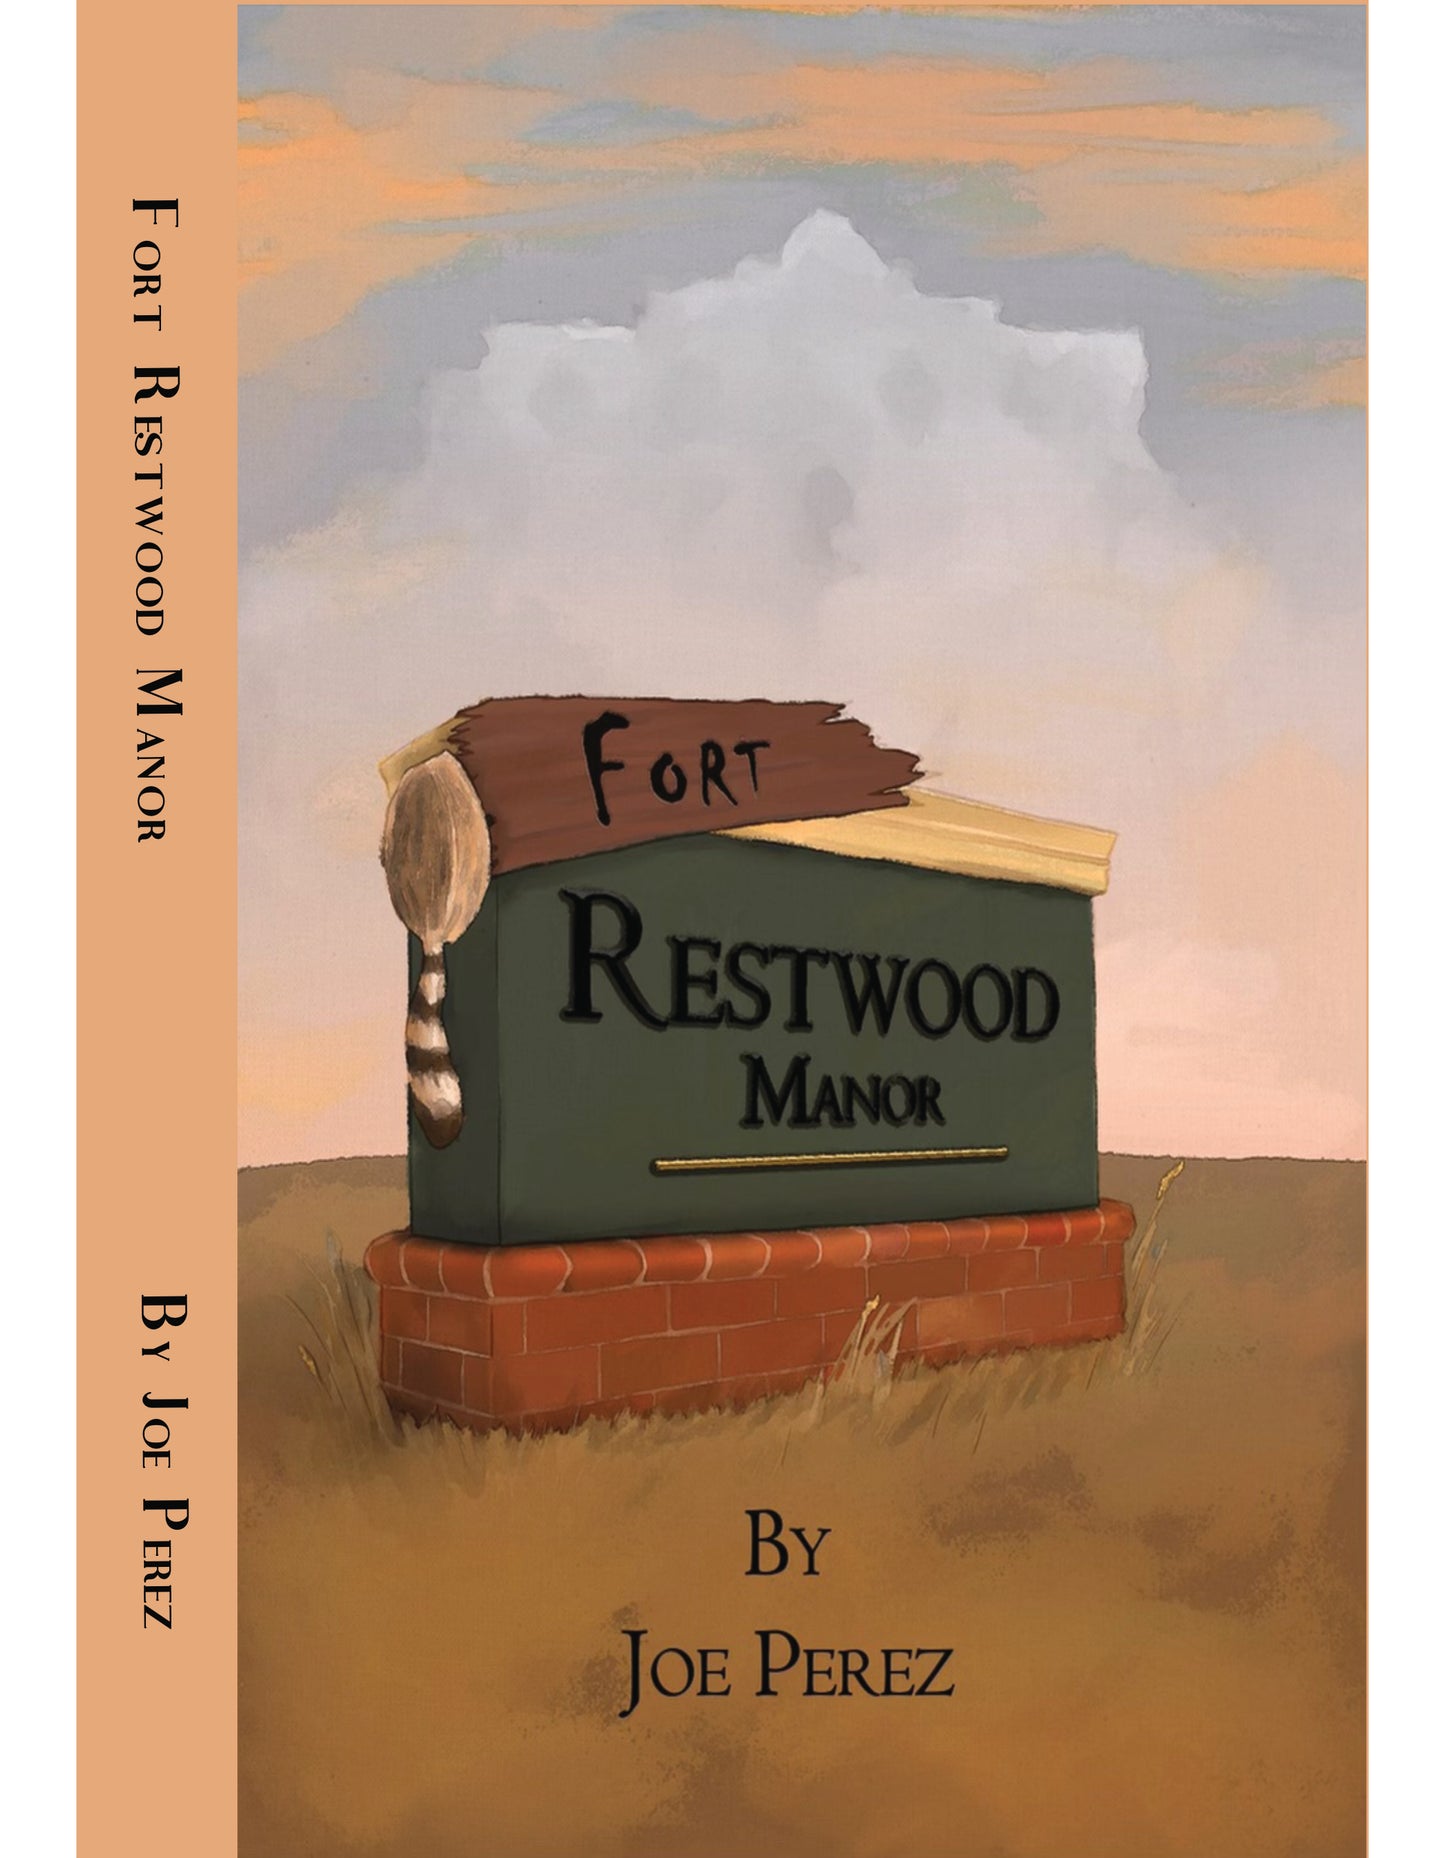 Fort Restwood Manor by Joe Perez